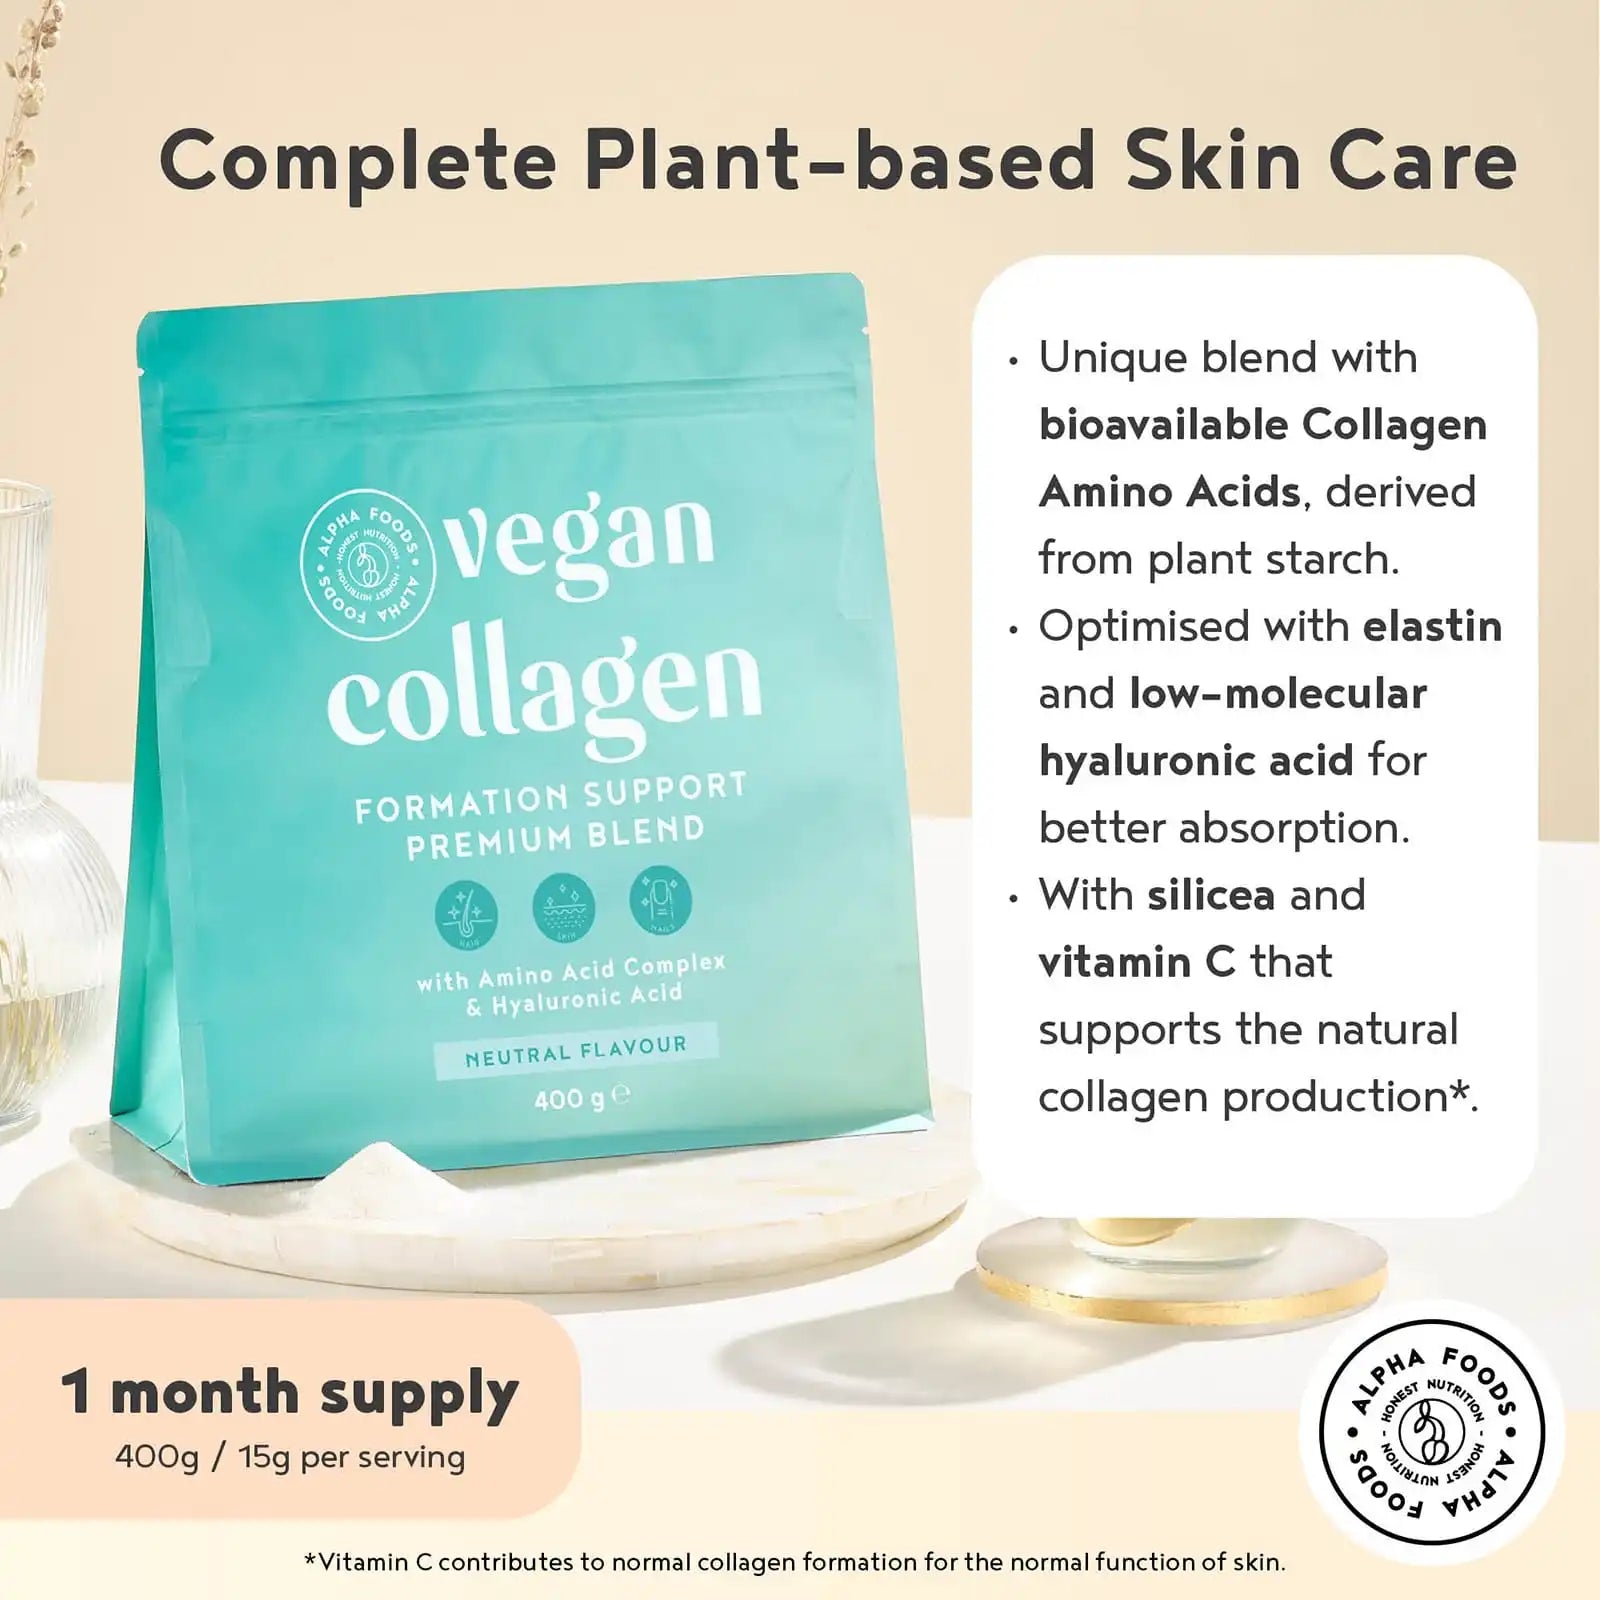 A+ One - Vegan Collagen Formation Support